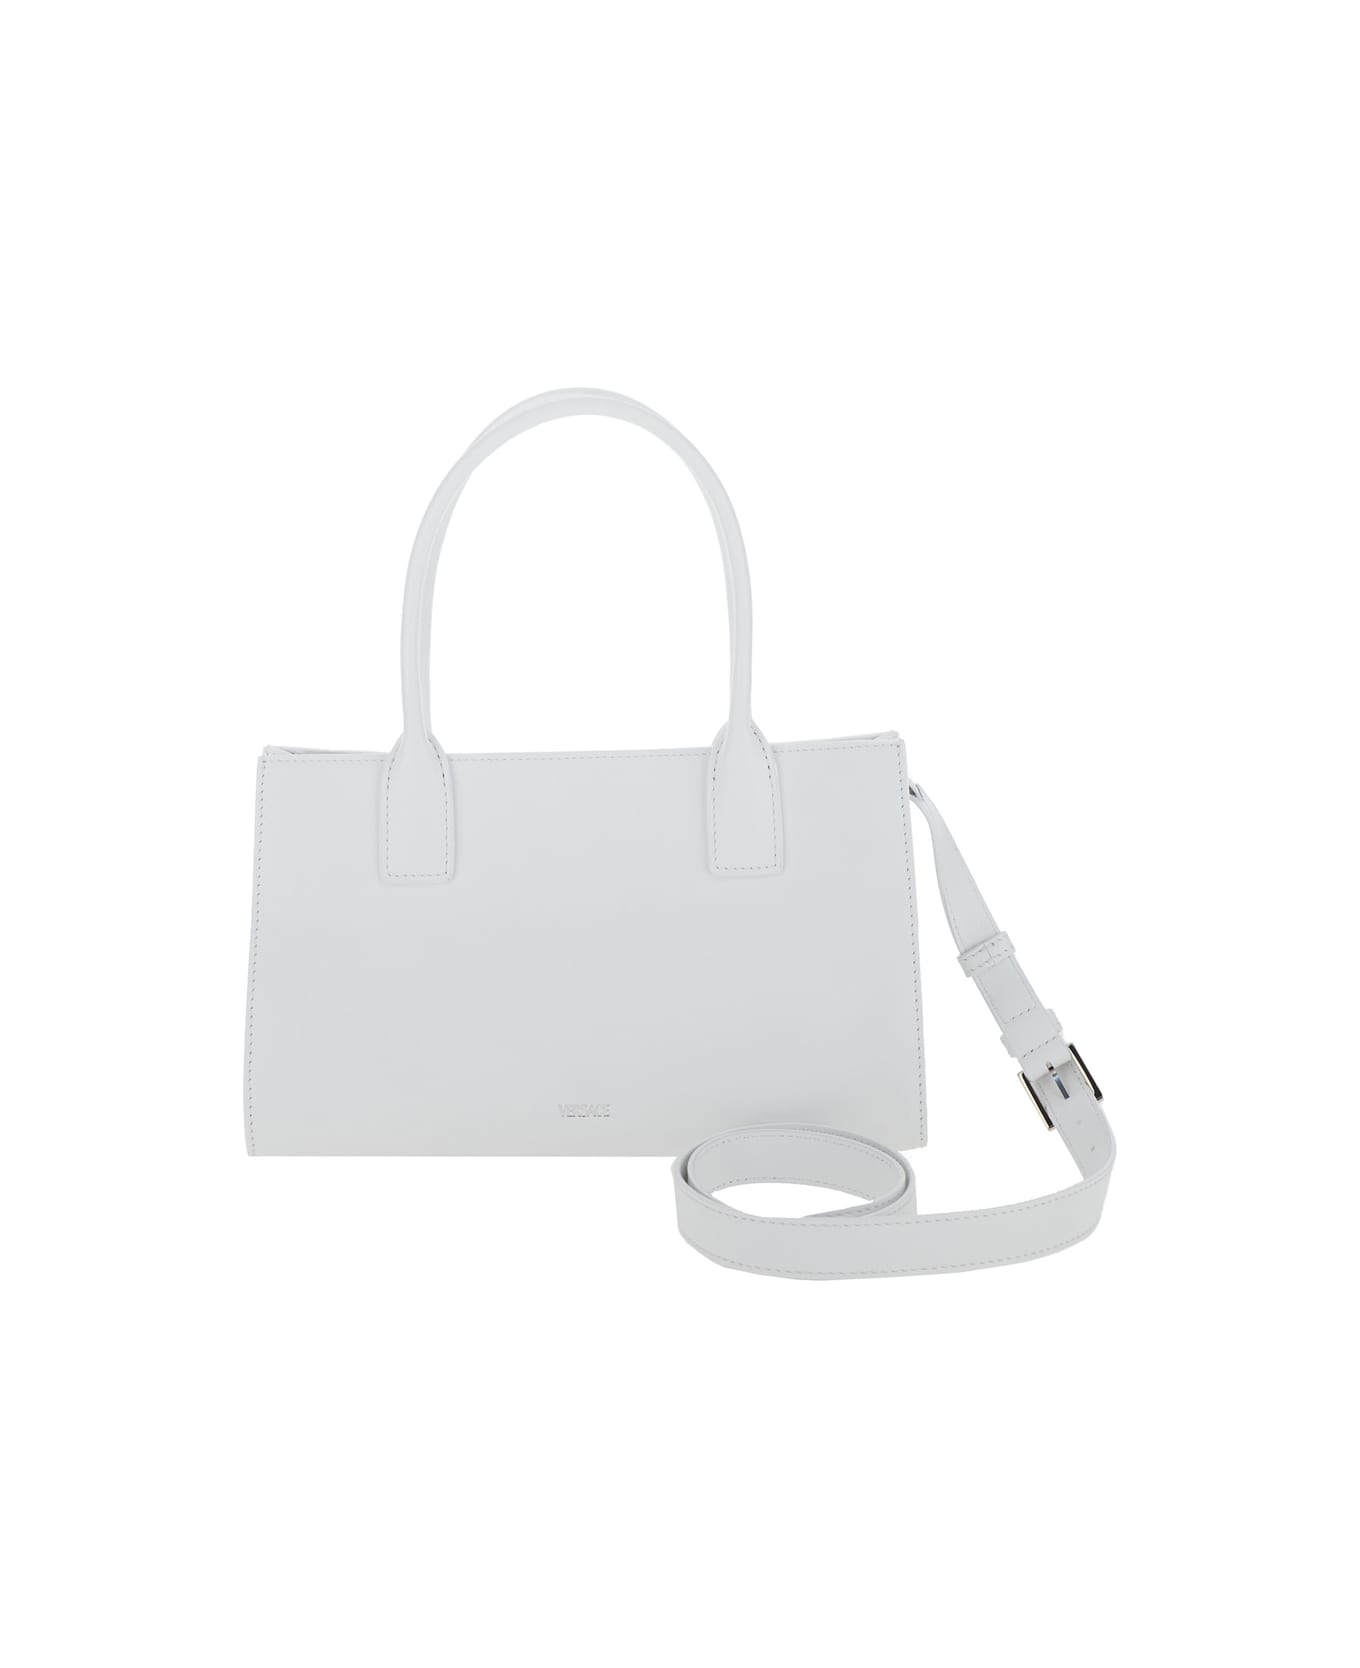 Versace Large Tote Look1 - White